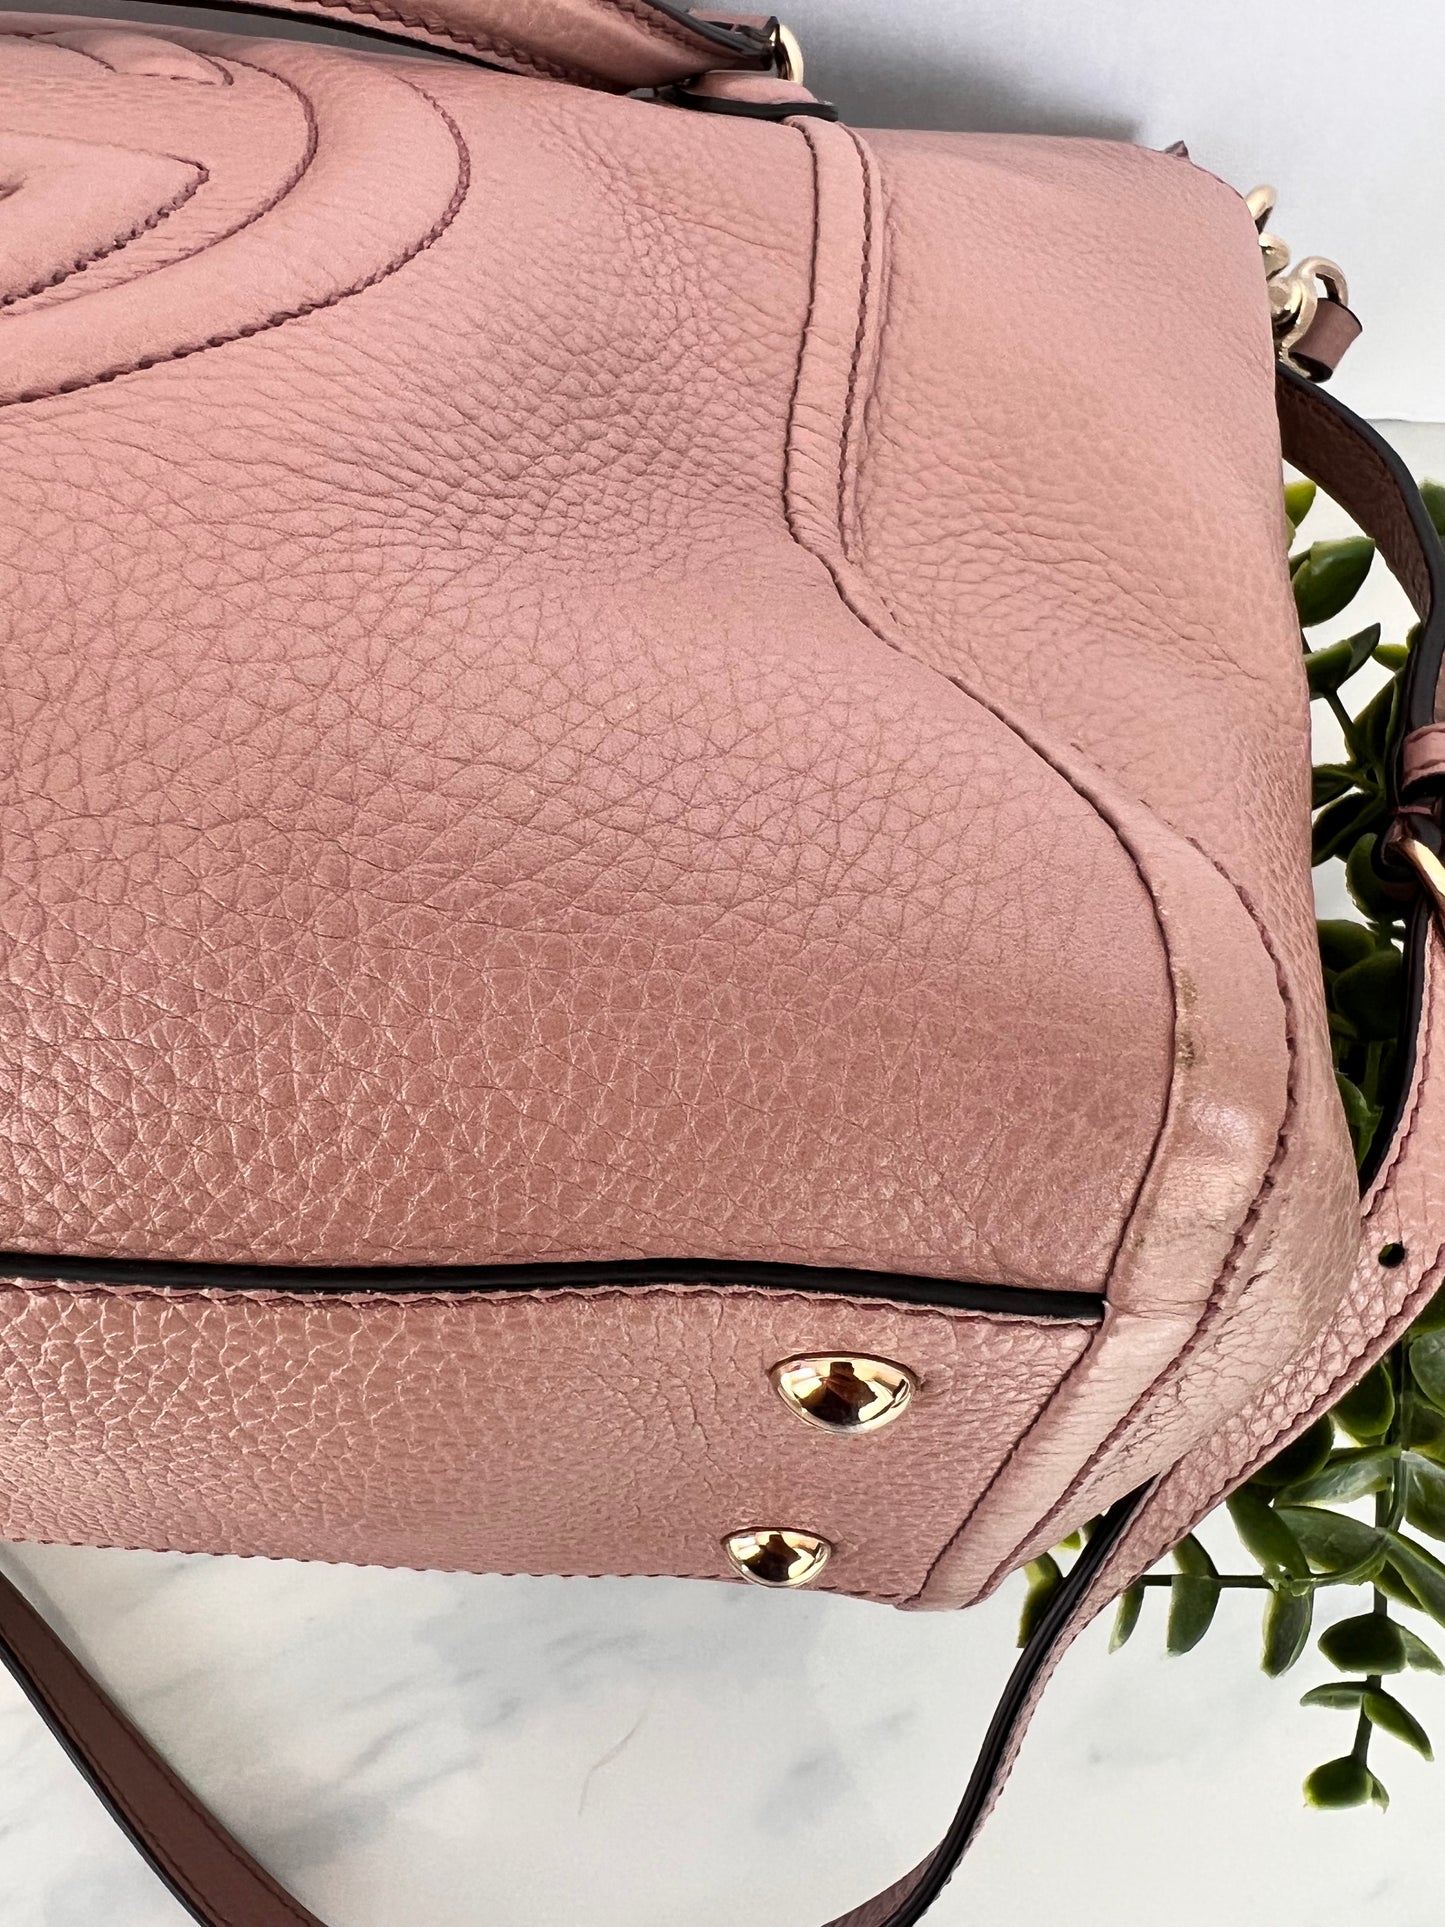 Gucci Soho Light Pink Taupe Leather Tote Bag